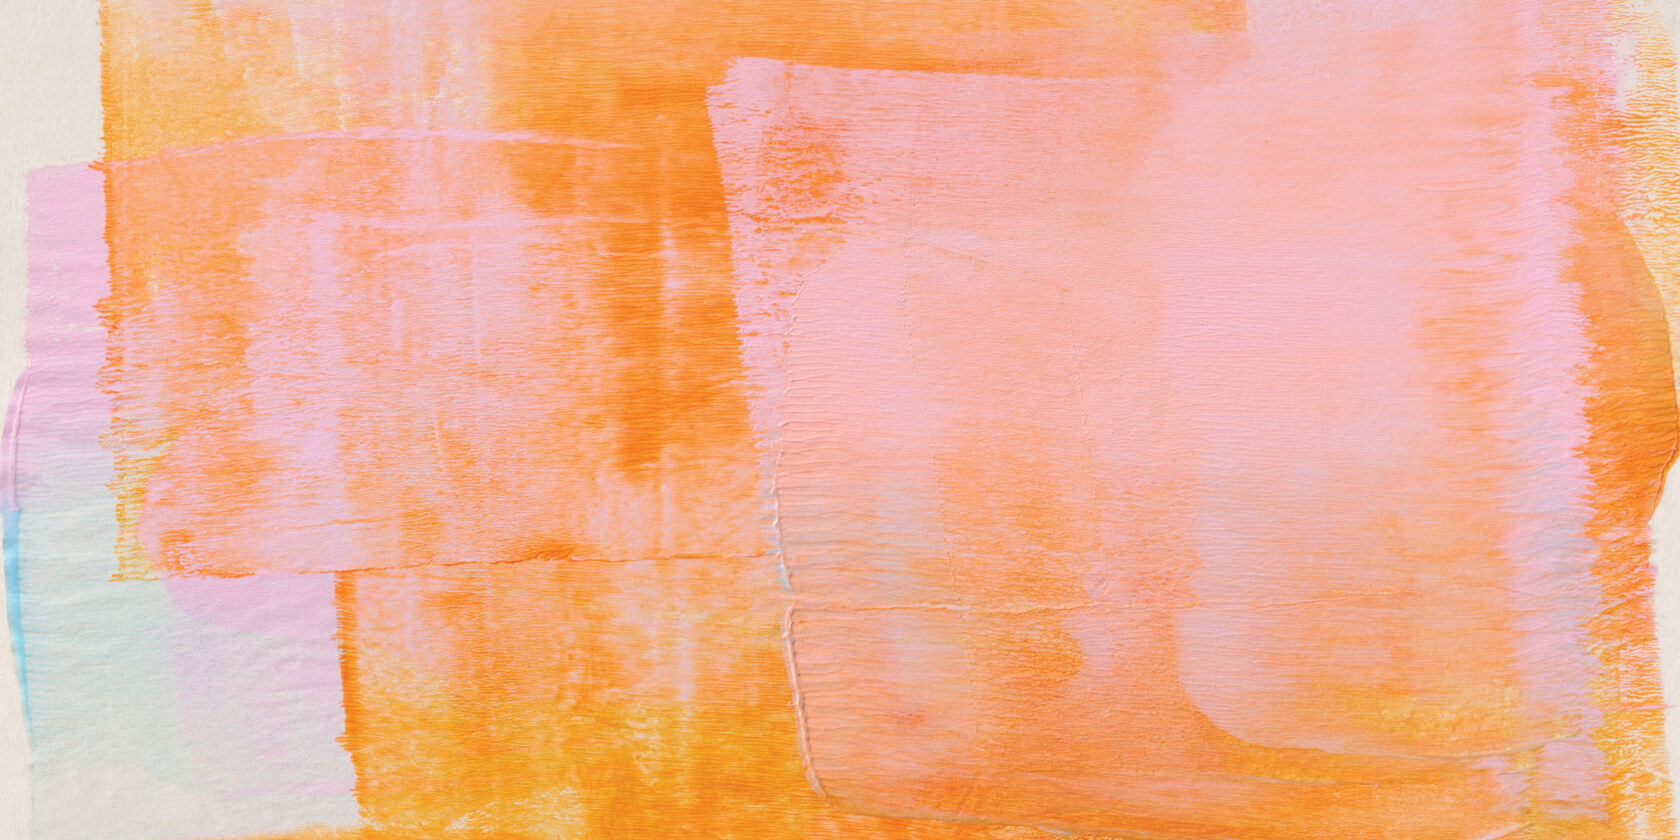 Abstract painted background in orange and pink